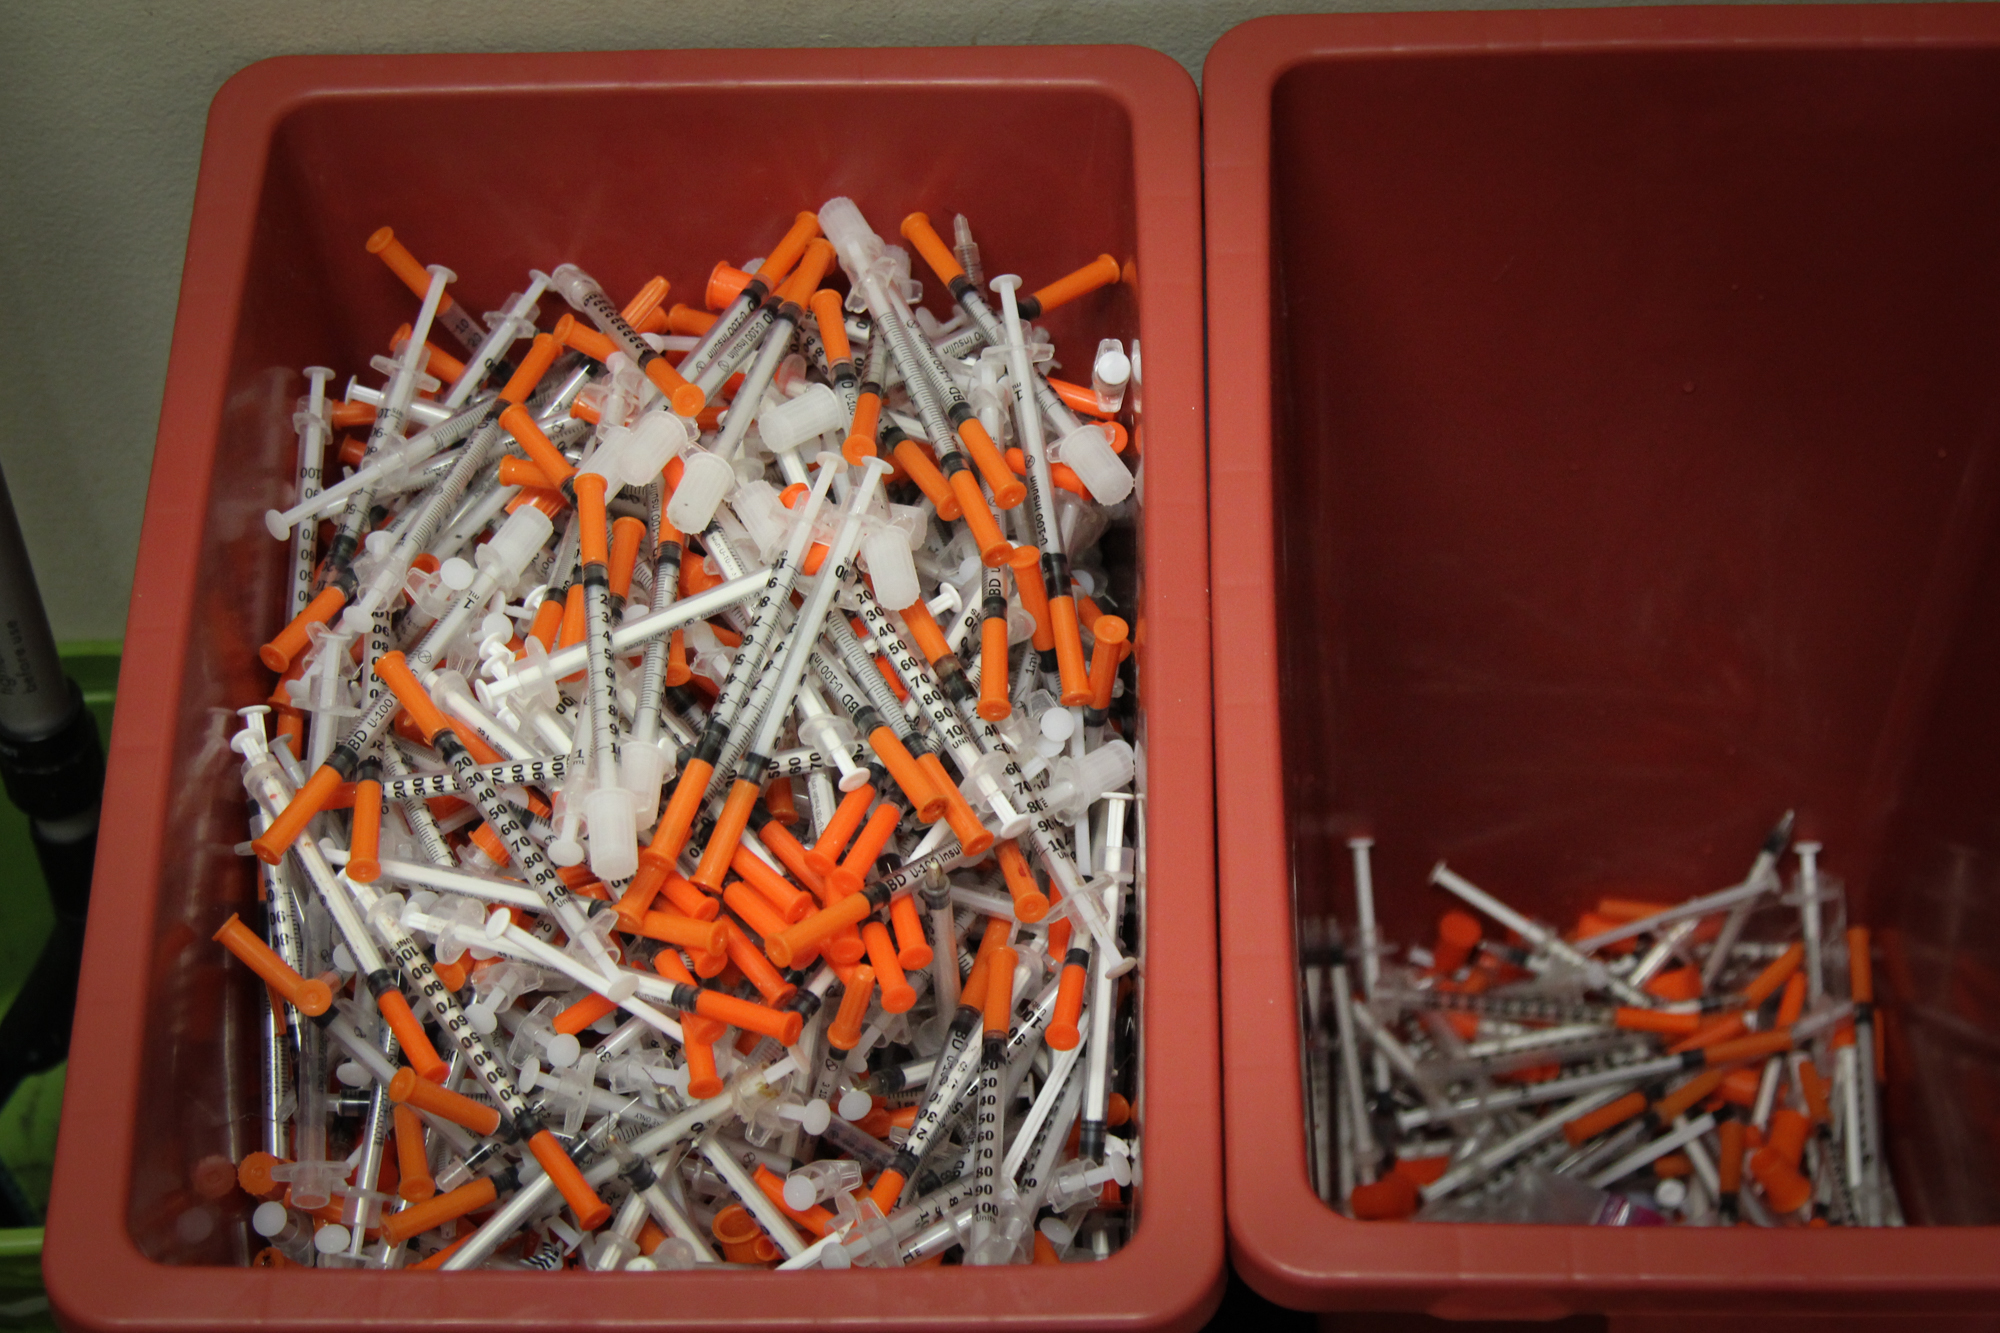 Discarded needles at the Four A’s syringe exchange in Anchorage. (Photo: Zachariah Hughes, Alaska Public Media – Anchorage)